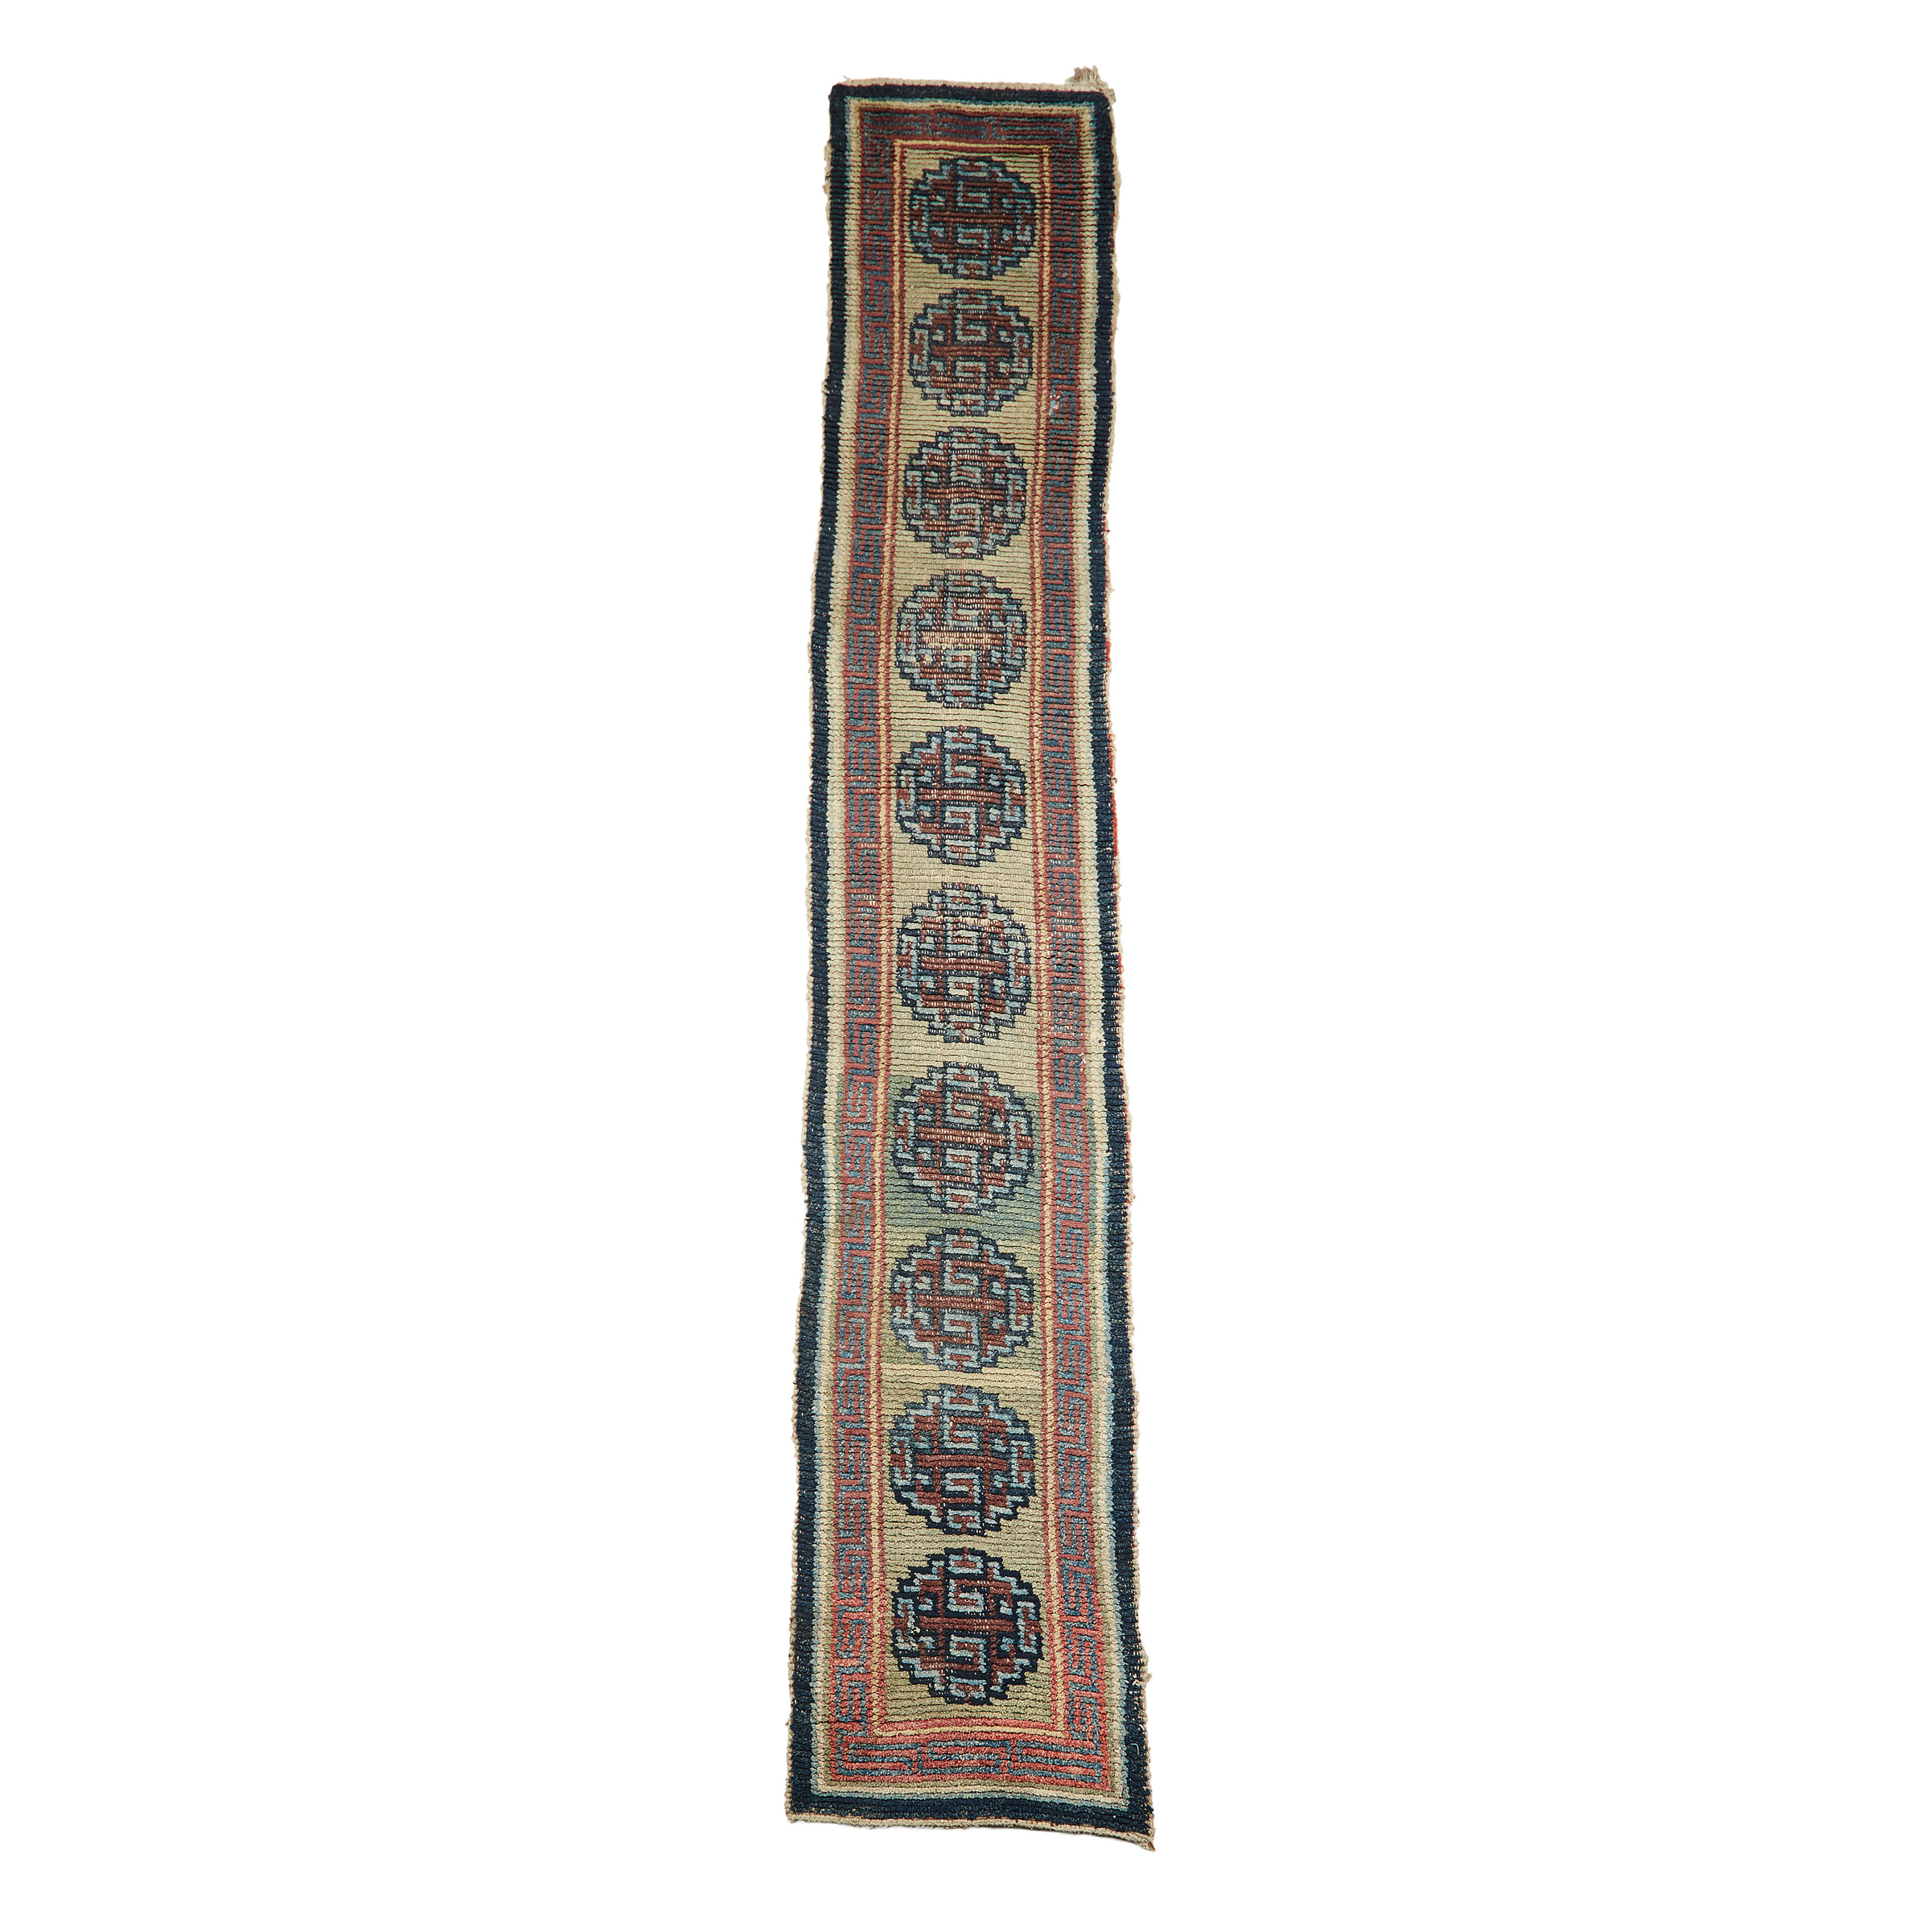 Yarkand Runner, Central Asia, early 20th century